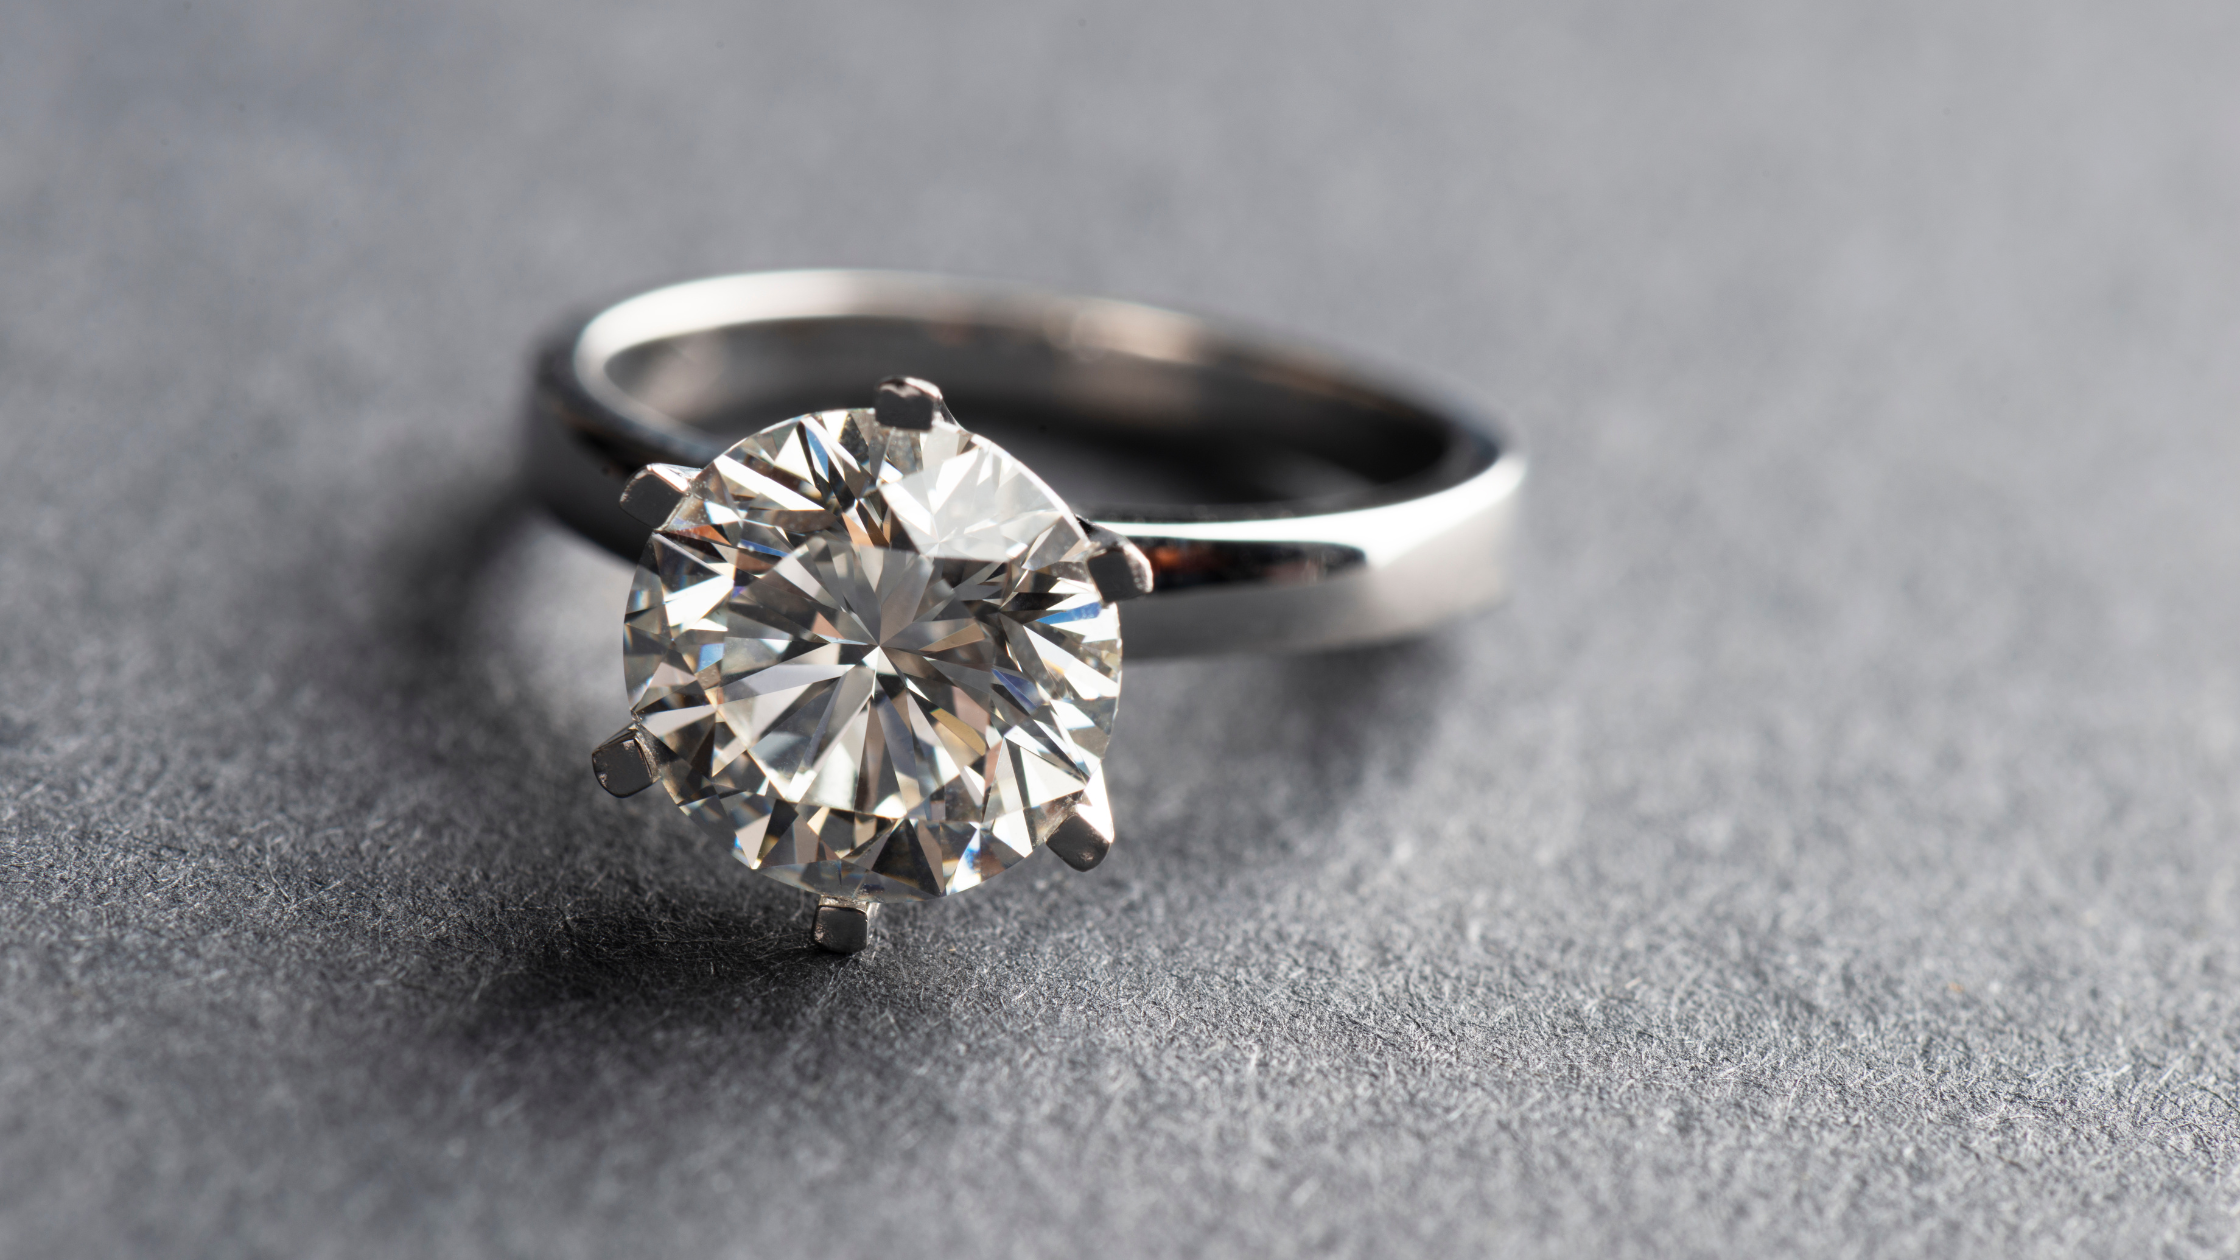 5 Timeless Engagement Ring Styles That Never Go Out of Fashion